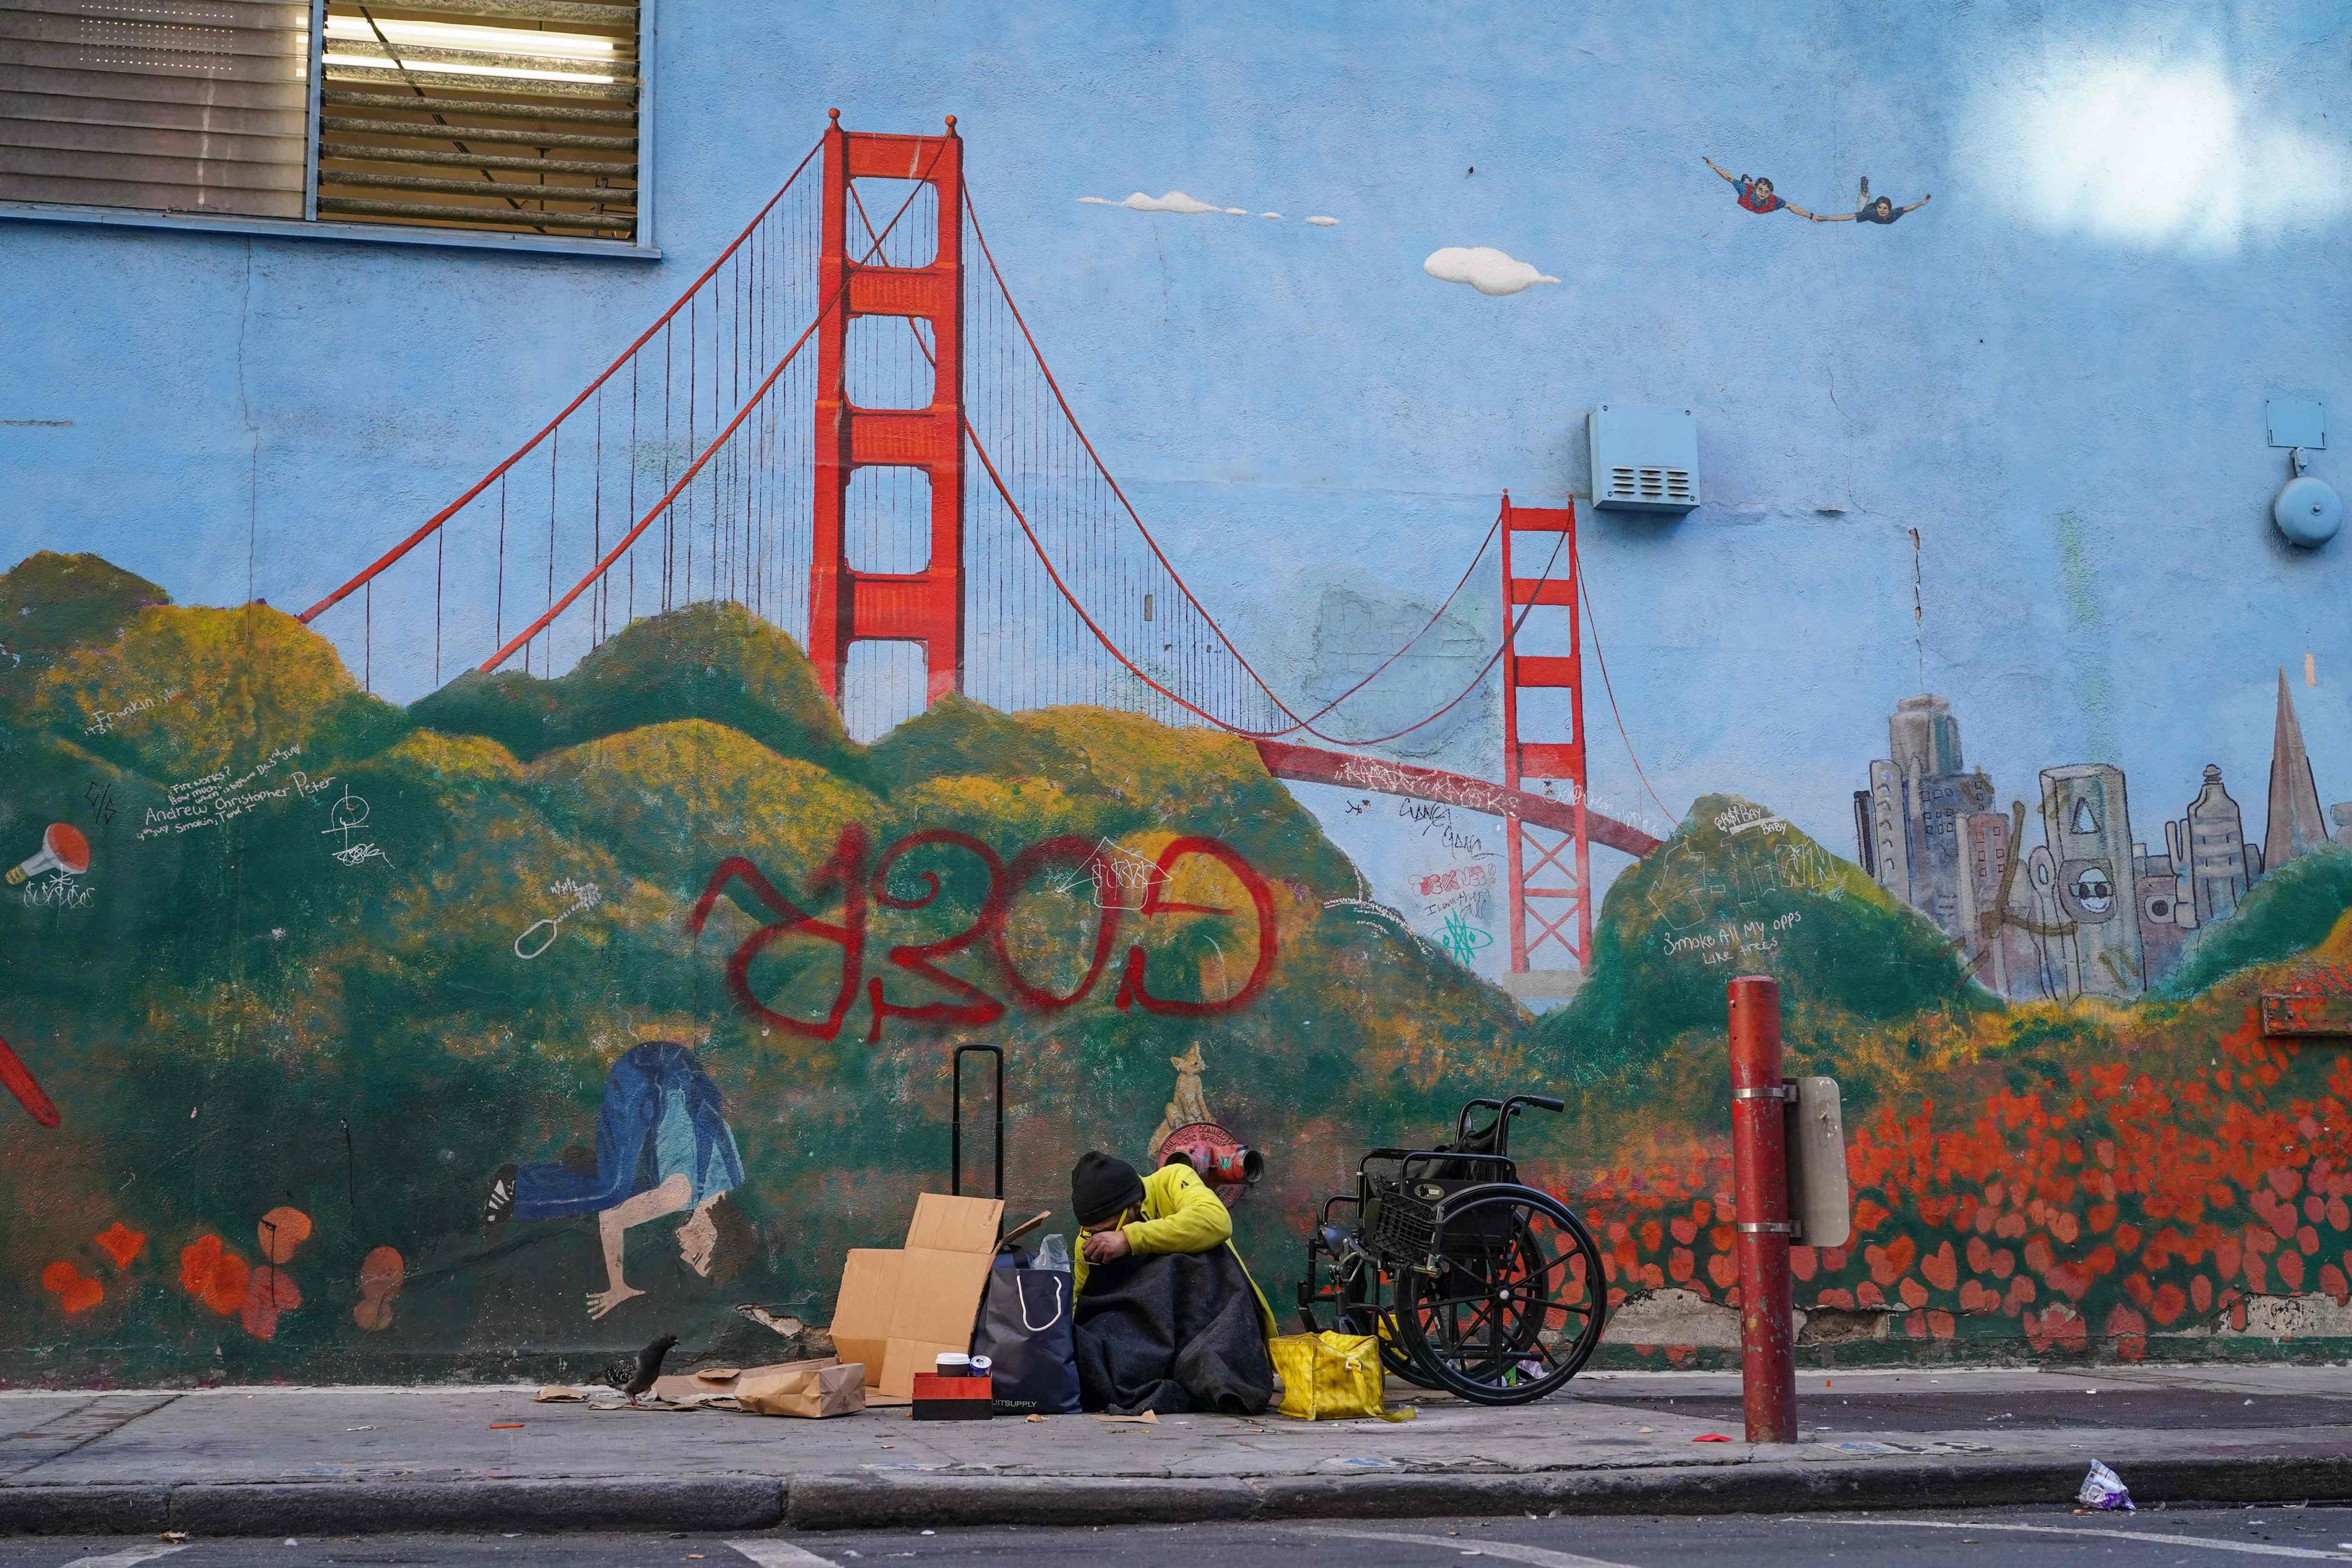 A homeless person in San Francisco sits by a mural of the city’s famed Golden Gate Bridge. Photo: AFP